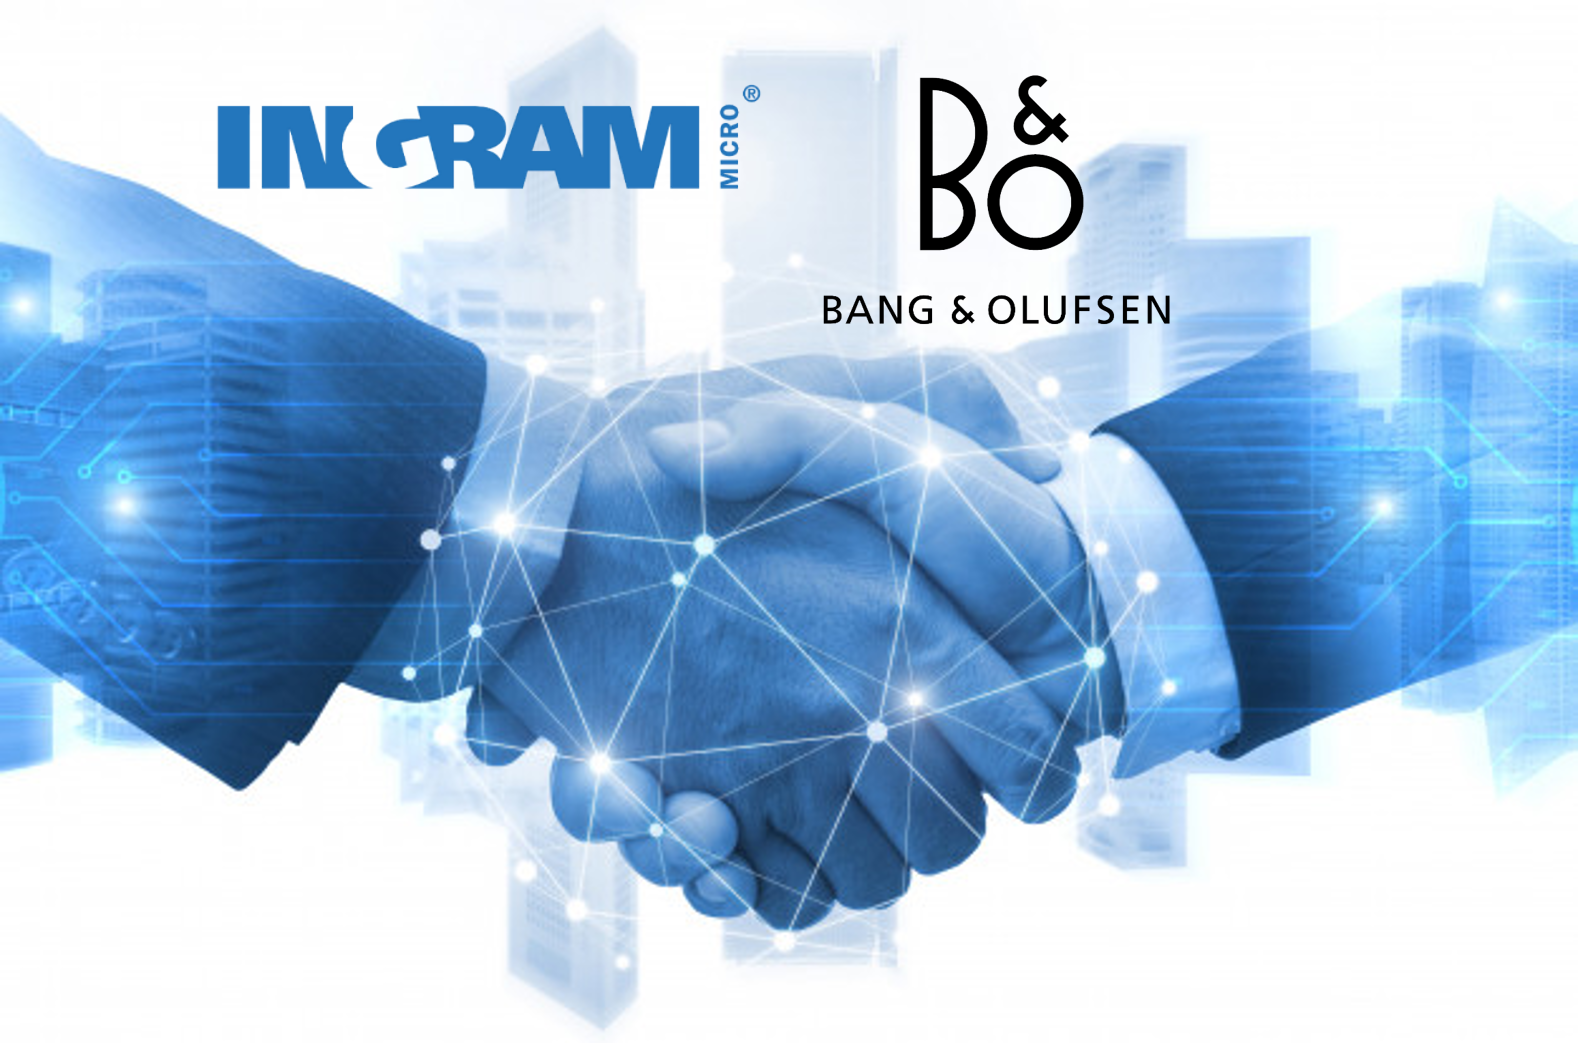 ANNOUNCEMENT New Partnership Bang & Olufsen and Ingram Micro in Europe